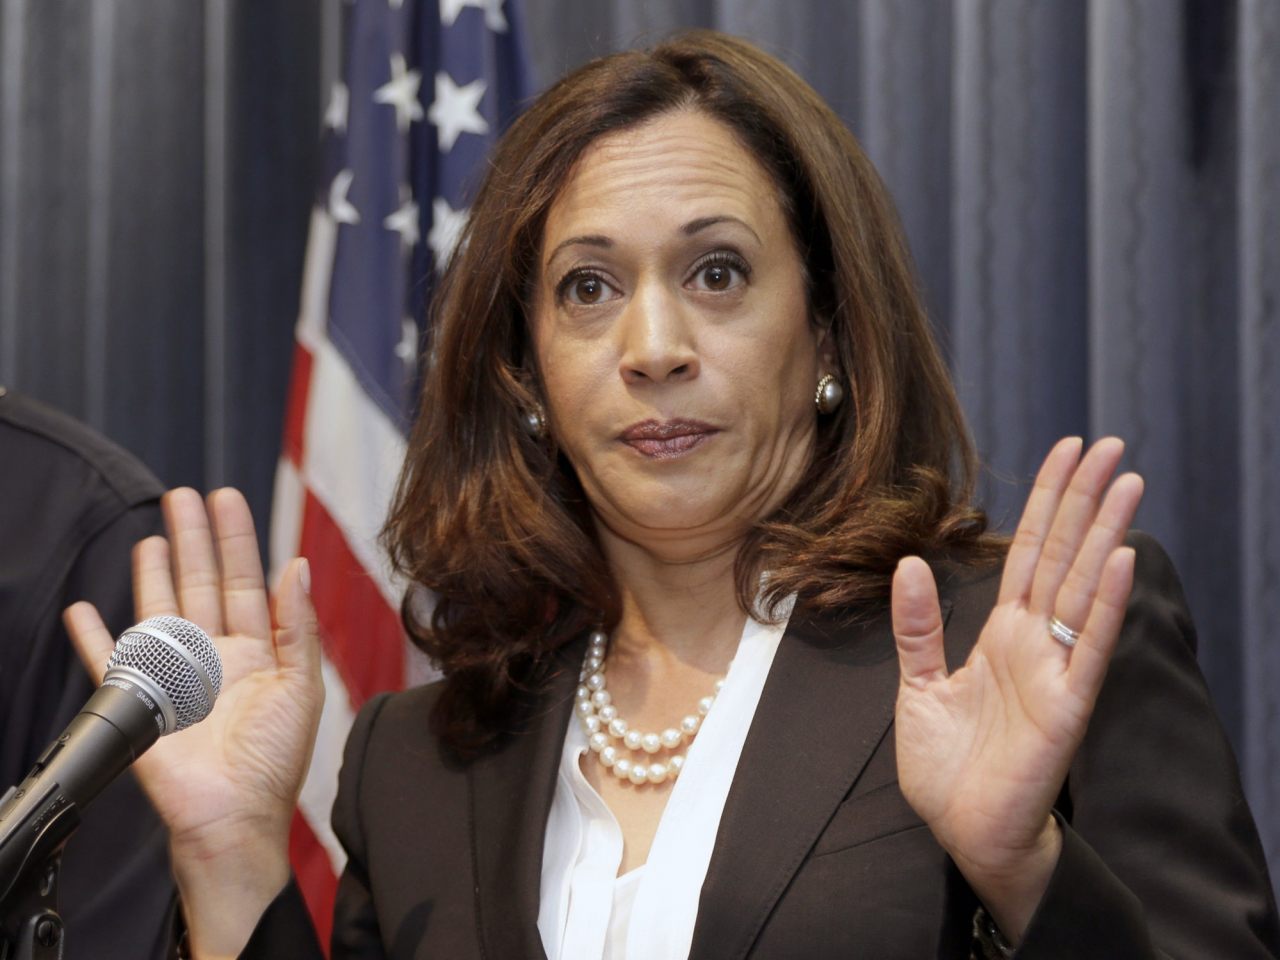 Image: Democratic VP candidate Kamala Harris kept hundreds of men in prison for cheap labor – pictures make up her mosaic